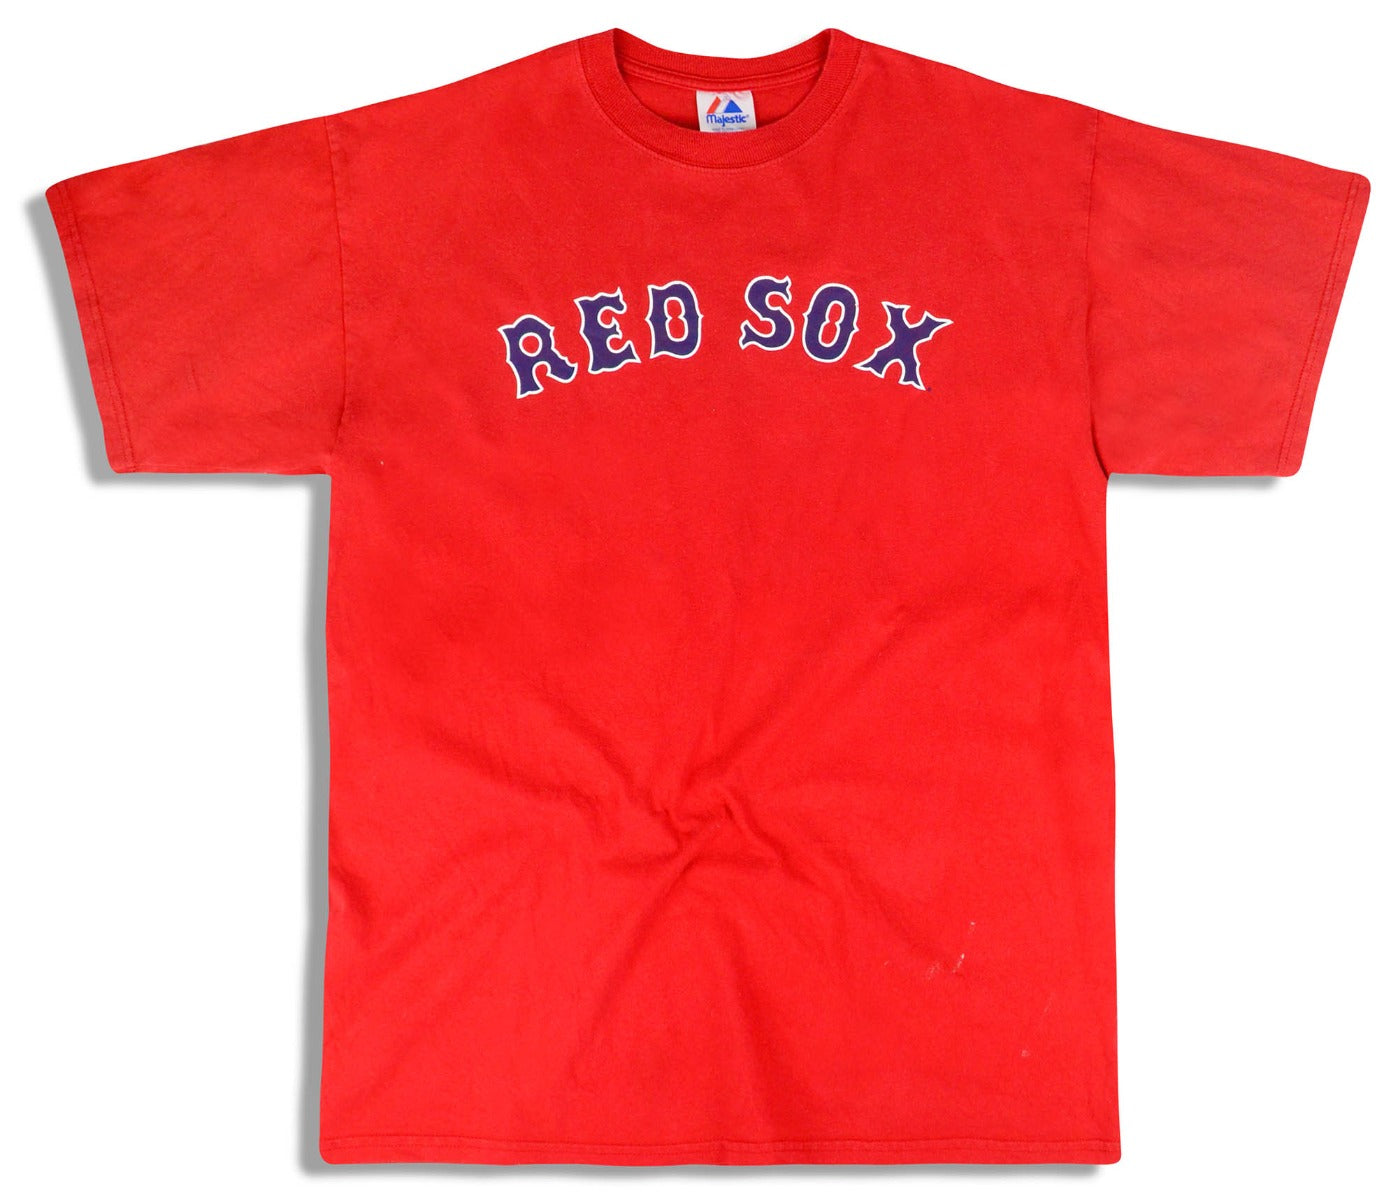 2004-07 BOSTON RED SOX SCHILLING #38 MAJESTIC TEE XL